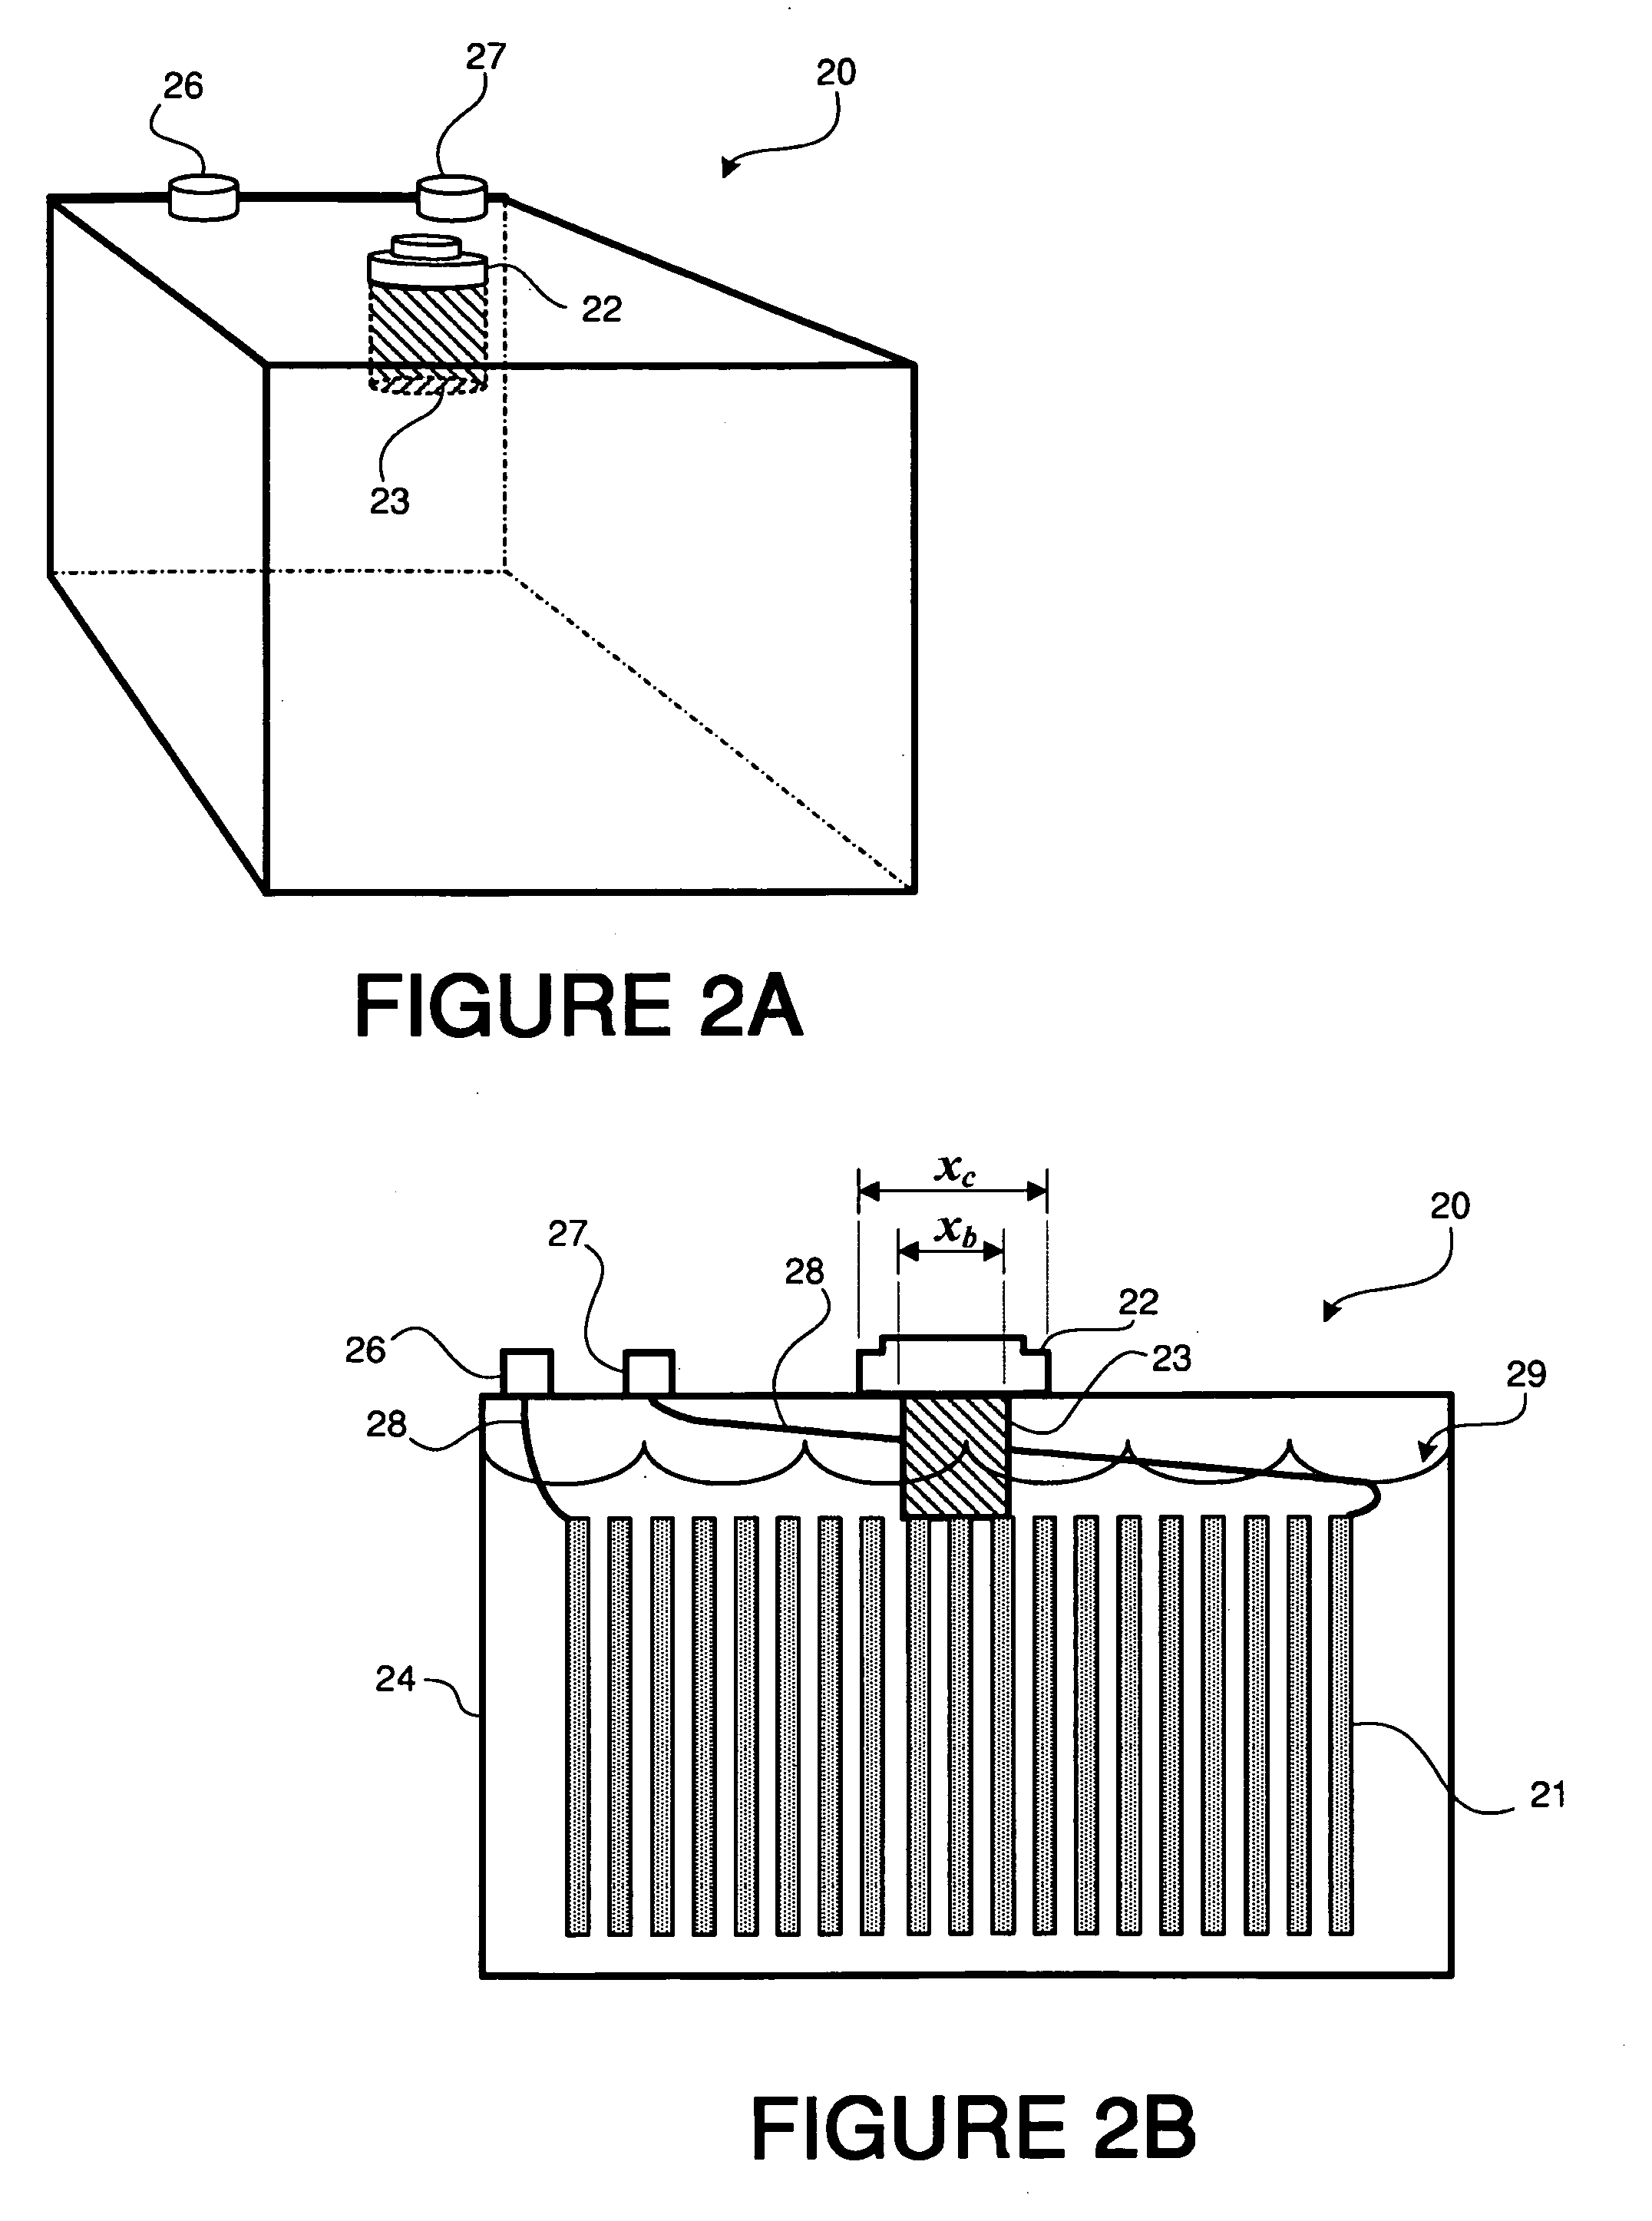 Battery monitoring device